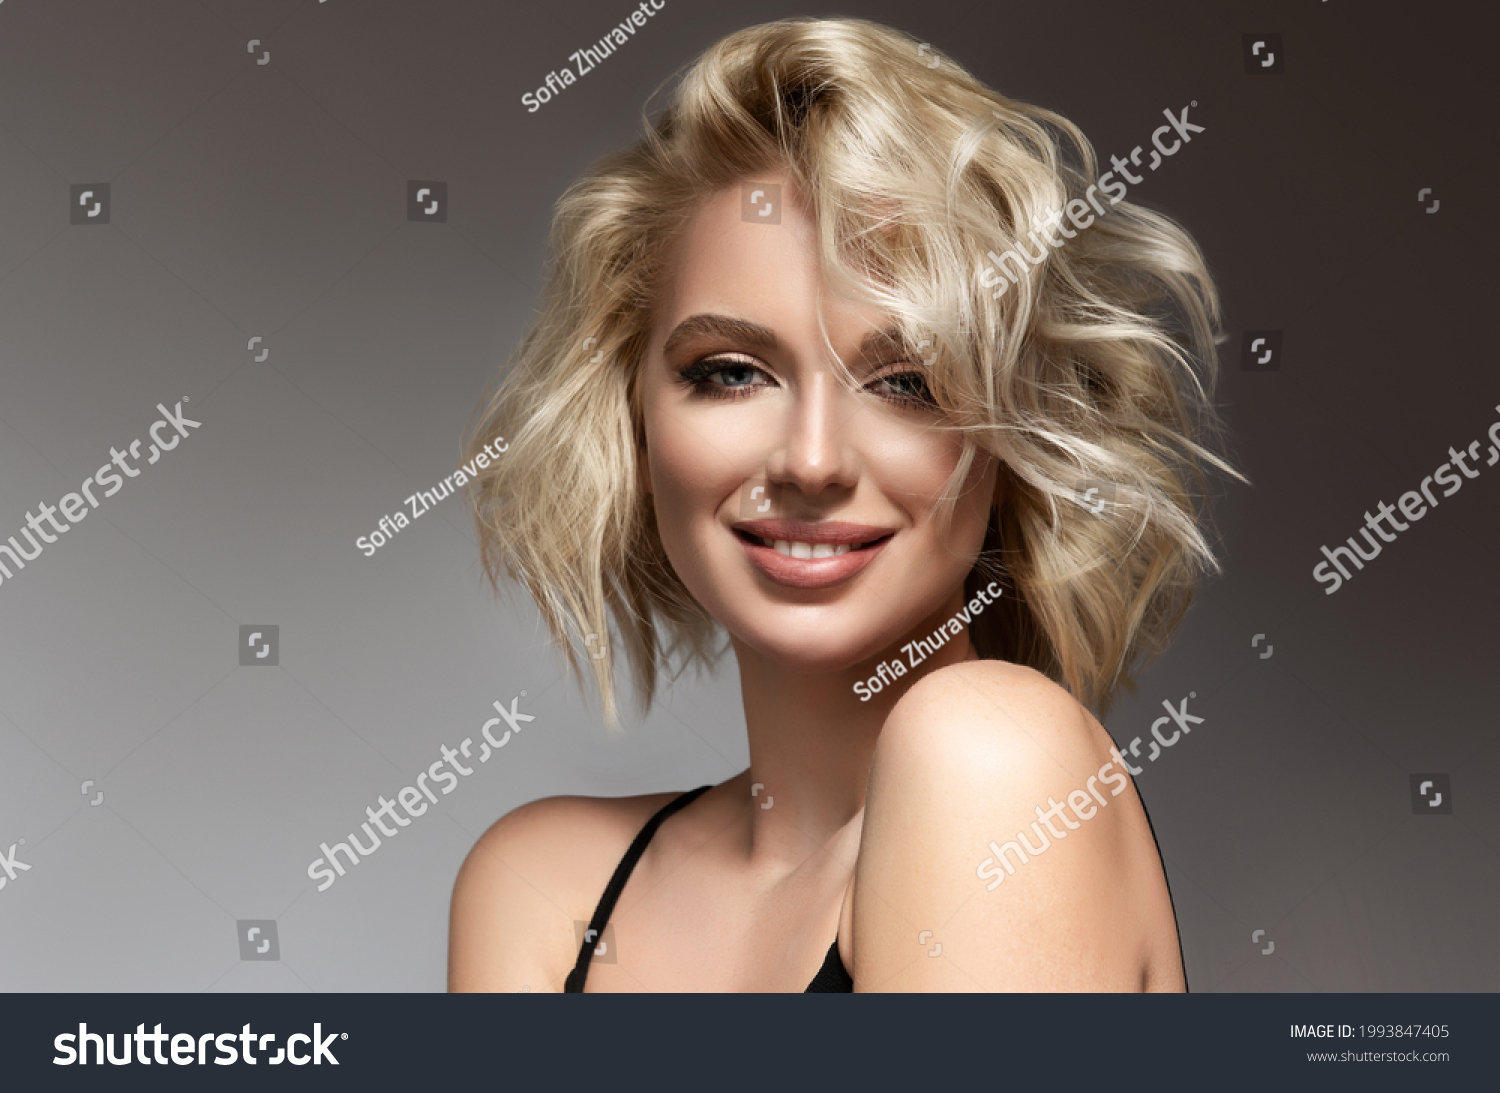 Beautiful model girl with short hair .Beauty woman with blonde curly hairstyle dye .Fashion, cosmetics and makeup #1993847405